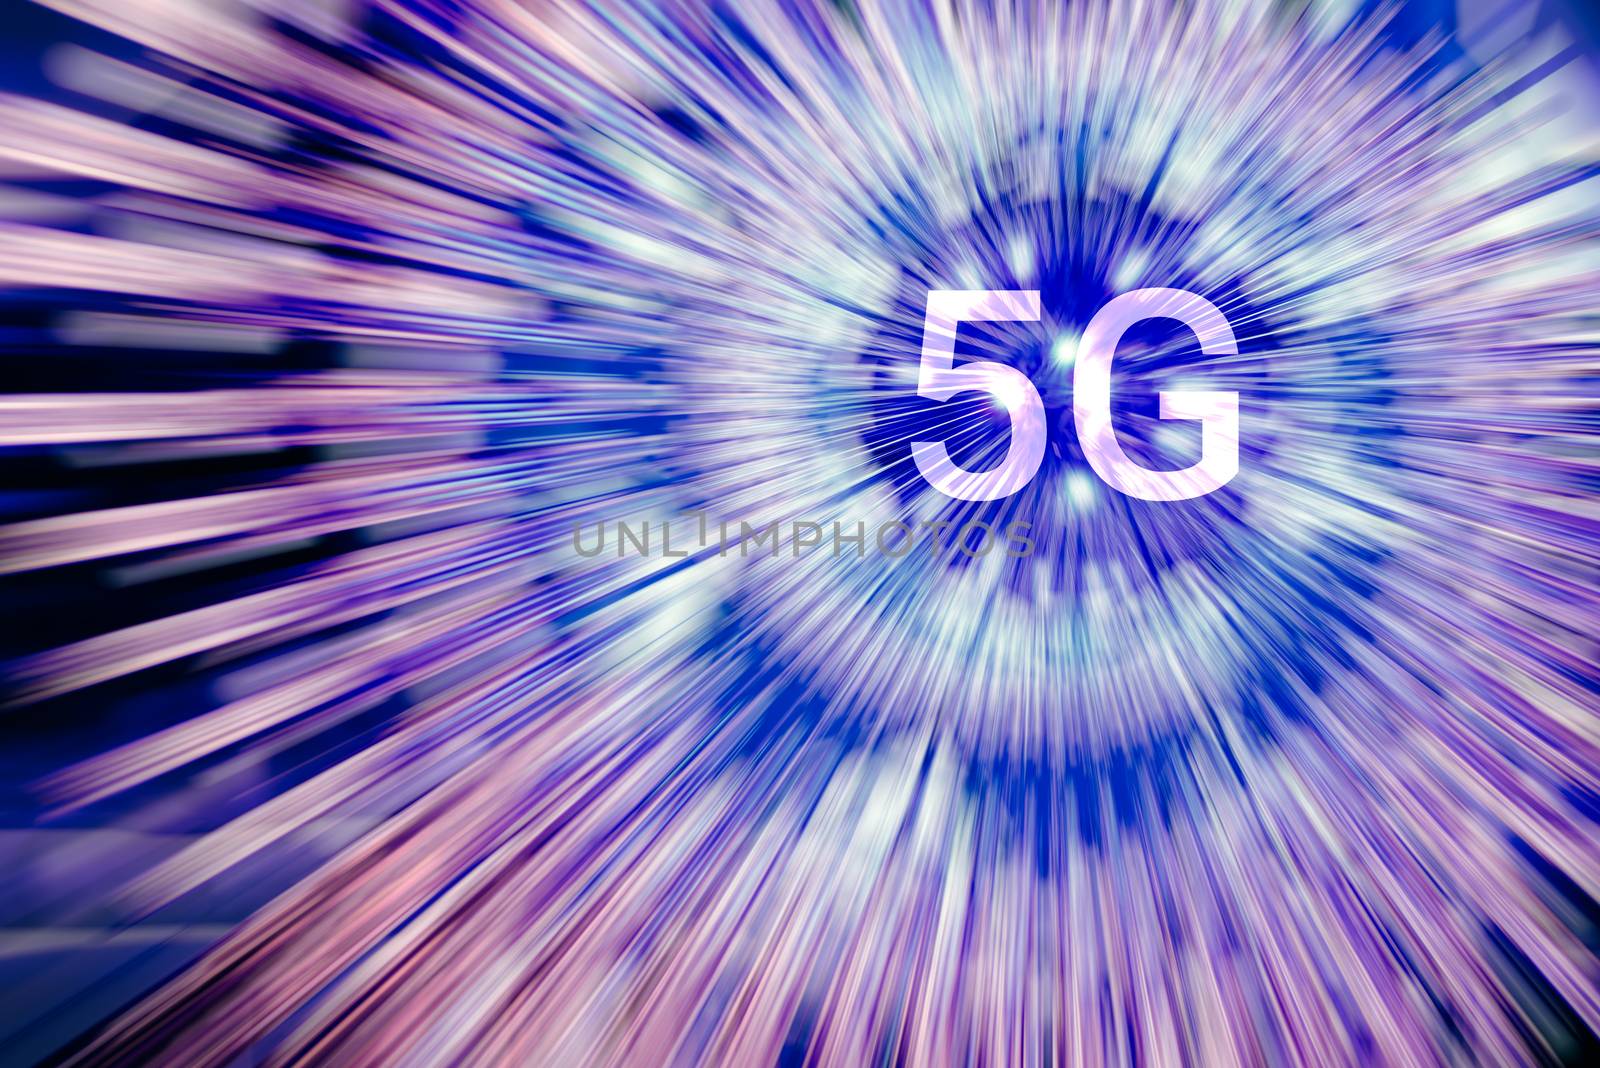 5G on a circular geometric space blue and purple color light rays. Neon radial lines background